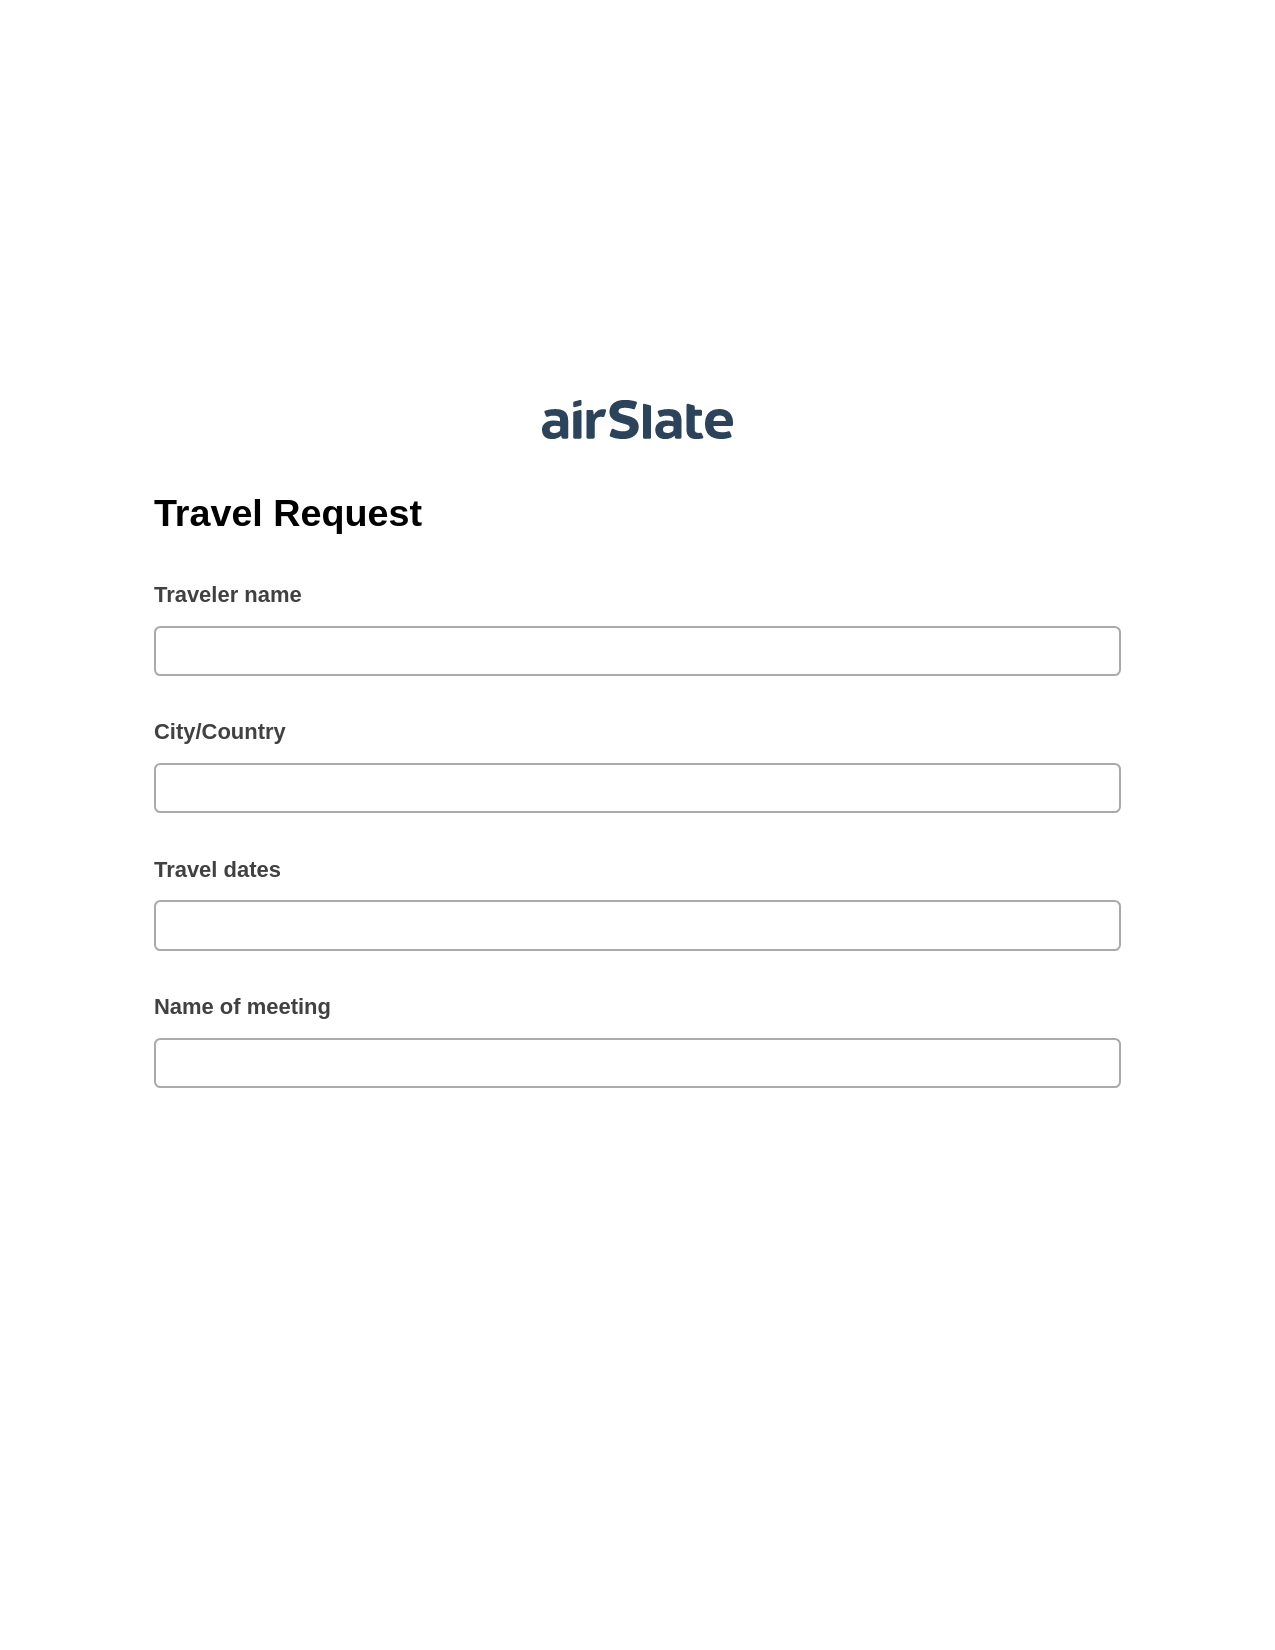 Travel Request Pre-fill Slate from MS Dynamics 365 Records Bot, Update NetSuite Records Bot, OneDrive Bot